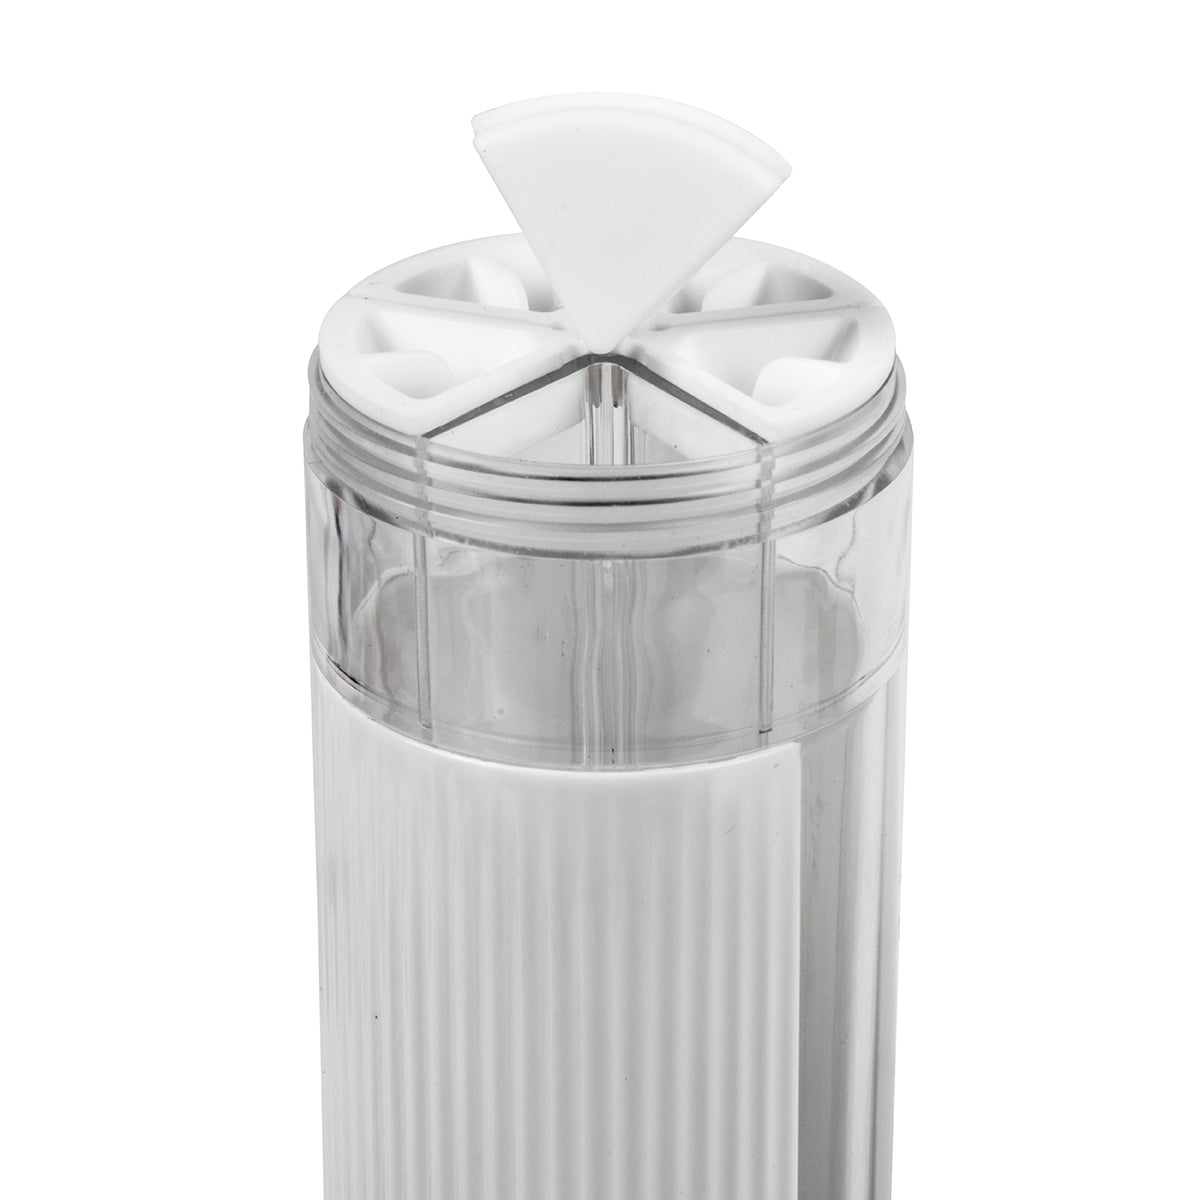 MasterPan MP-148 Mastermill 5-in-1 Multi Section Spice Grinder & Dispenser White